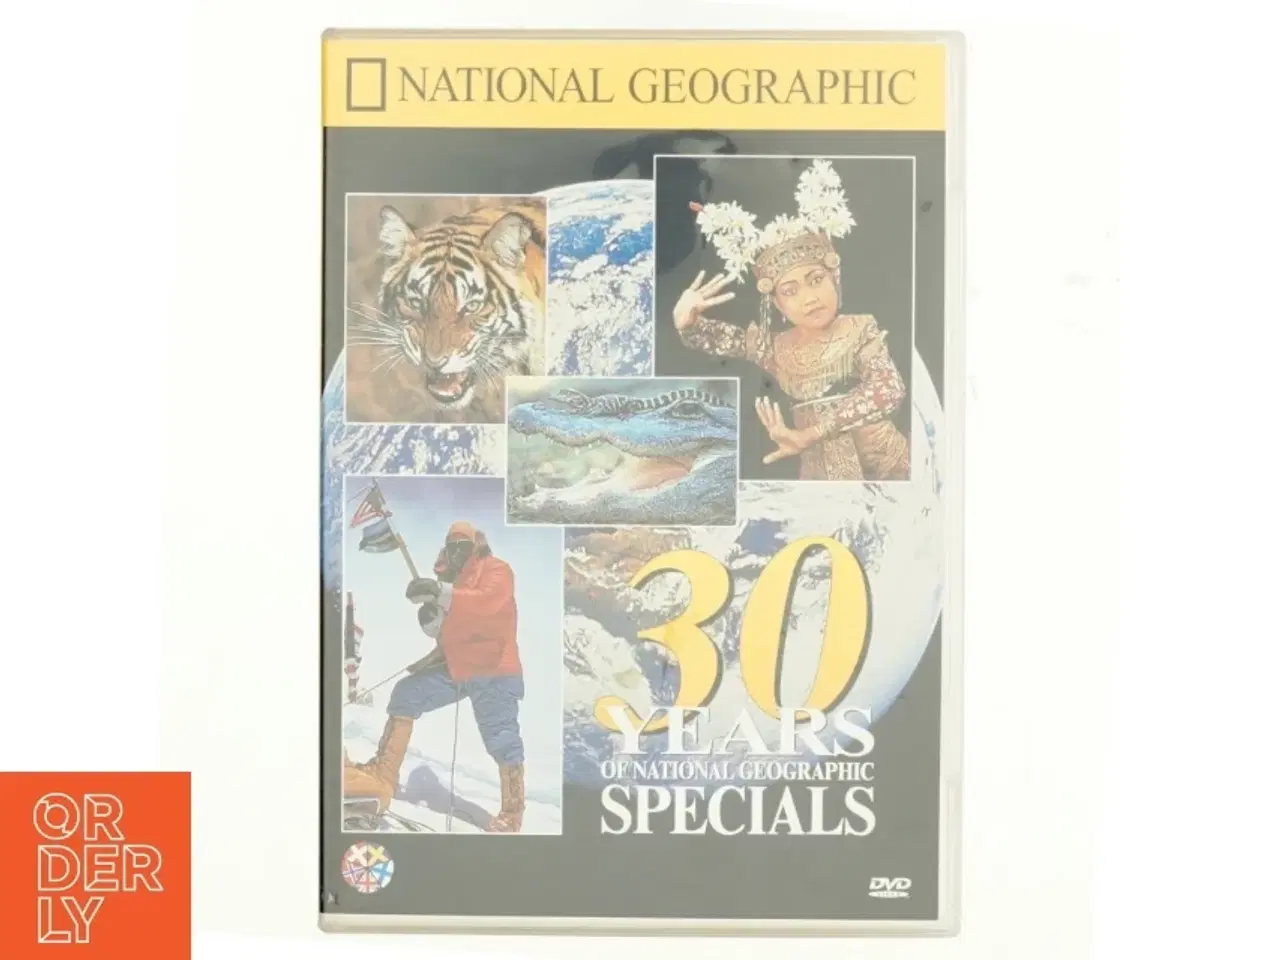 Billede 1 - NATIONAL GEOGRAPHIC, 30 years